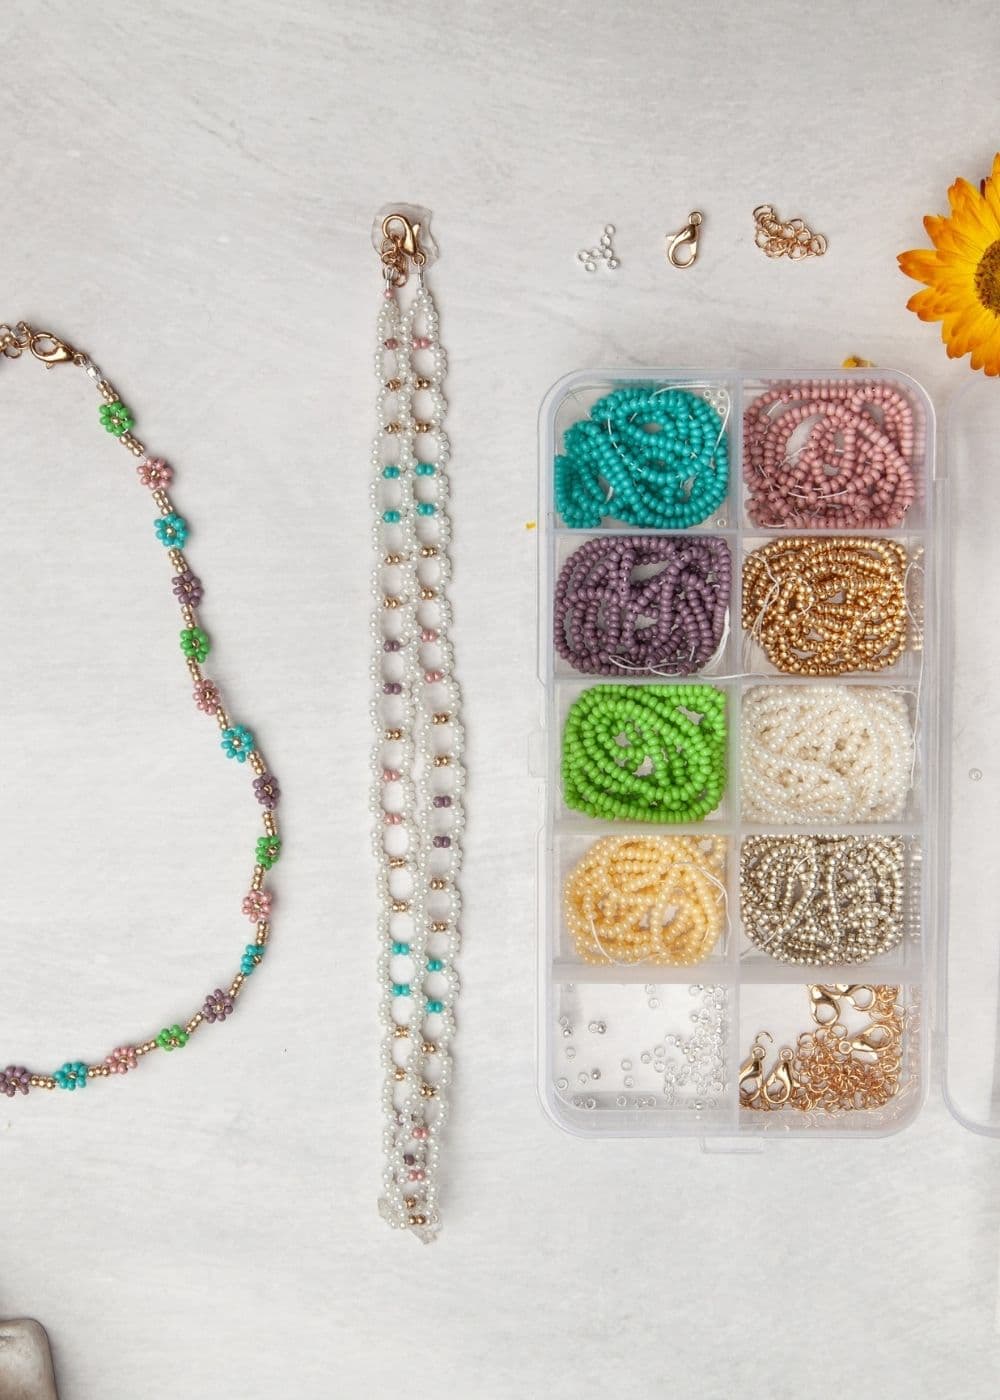 A box of beads, necklaces, and a flower on a table.